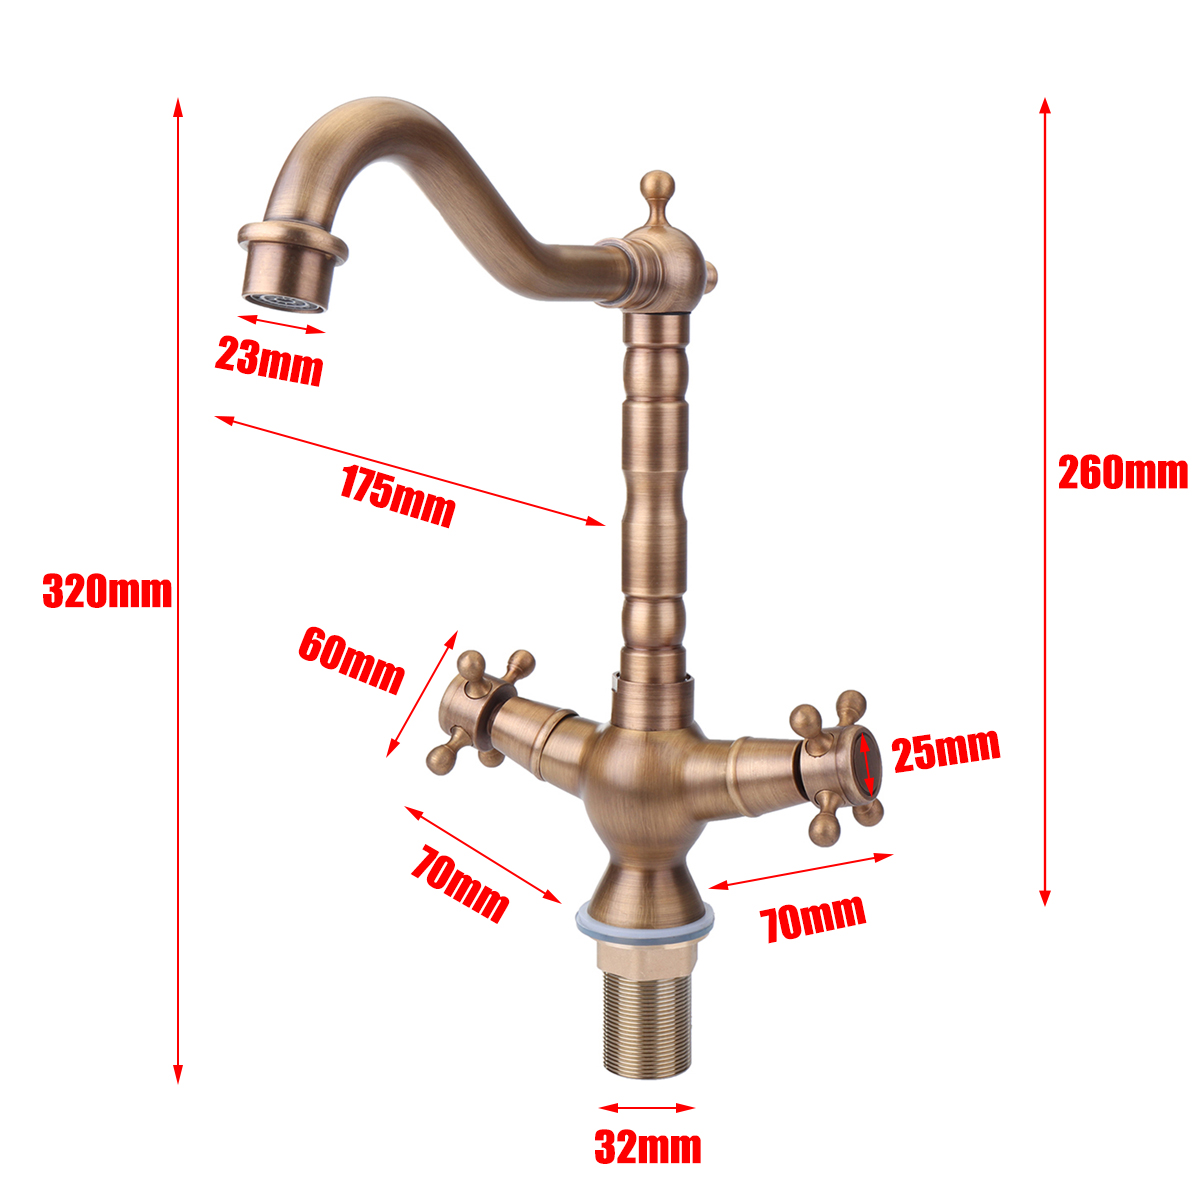 Rotatory-Antique-Brass-Basin-Faucet-Cold-Hot-Water-Tap-Mixer-for-Kitchen-Bathroom-Sink-1330422